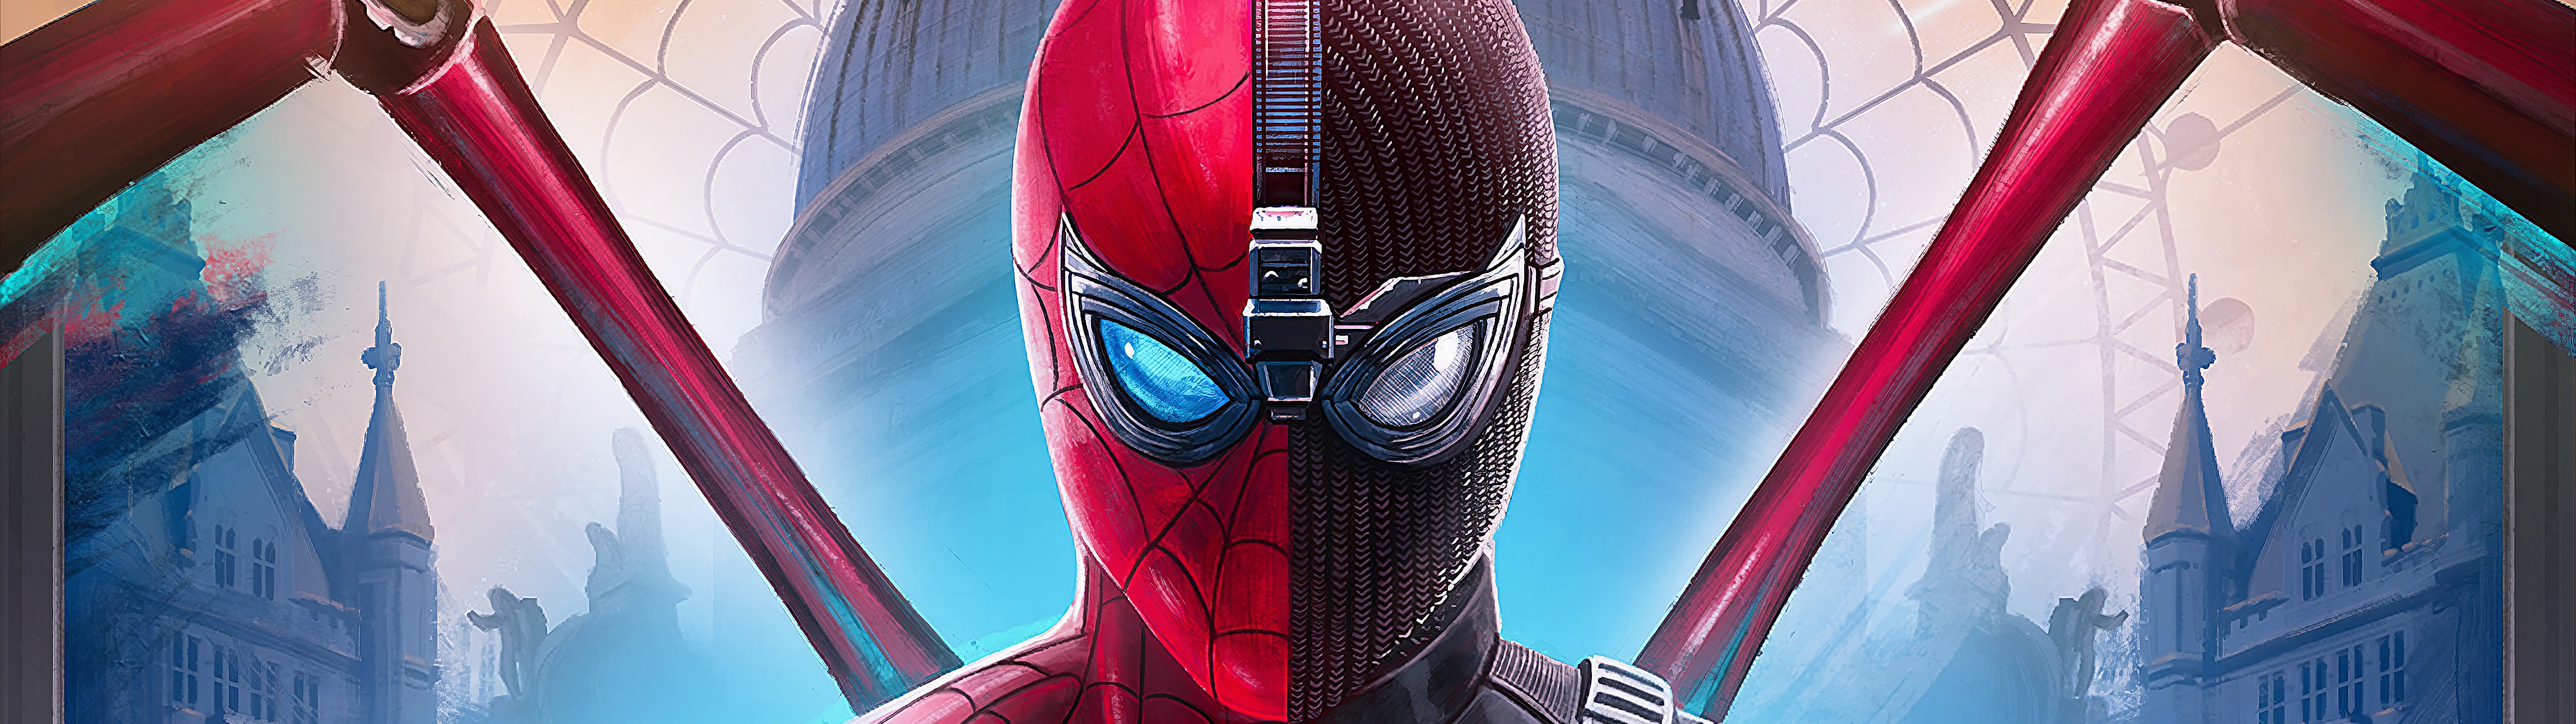 Spider Man Far From Home Iron Spider Stealth Suit 8K Wallpaper